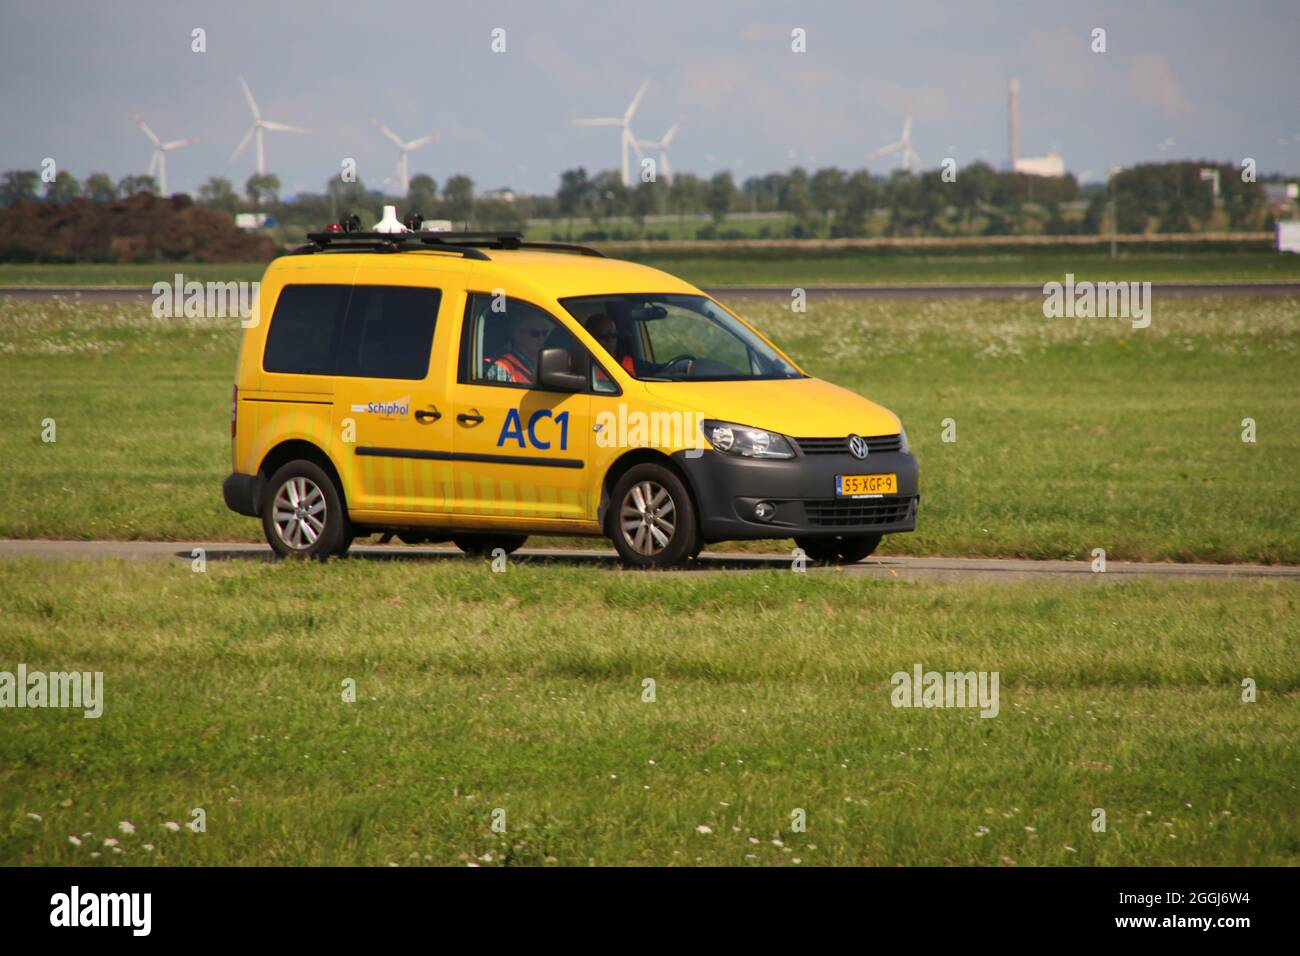 AC1 from alarm central of  Schiphol Airport AlarmCentrale  at Polderbaan 18R-36L of Schiphol Amsterdam Airport the Netherlands Stock Photo